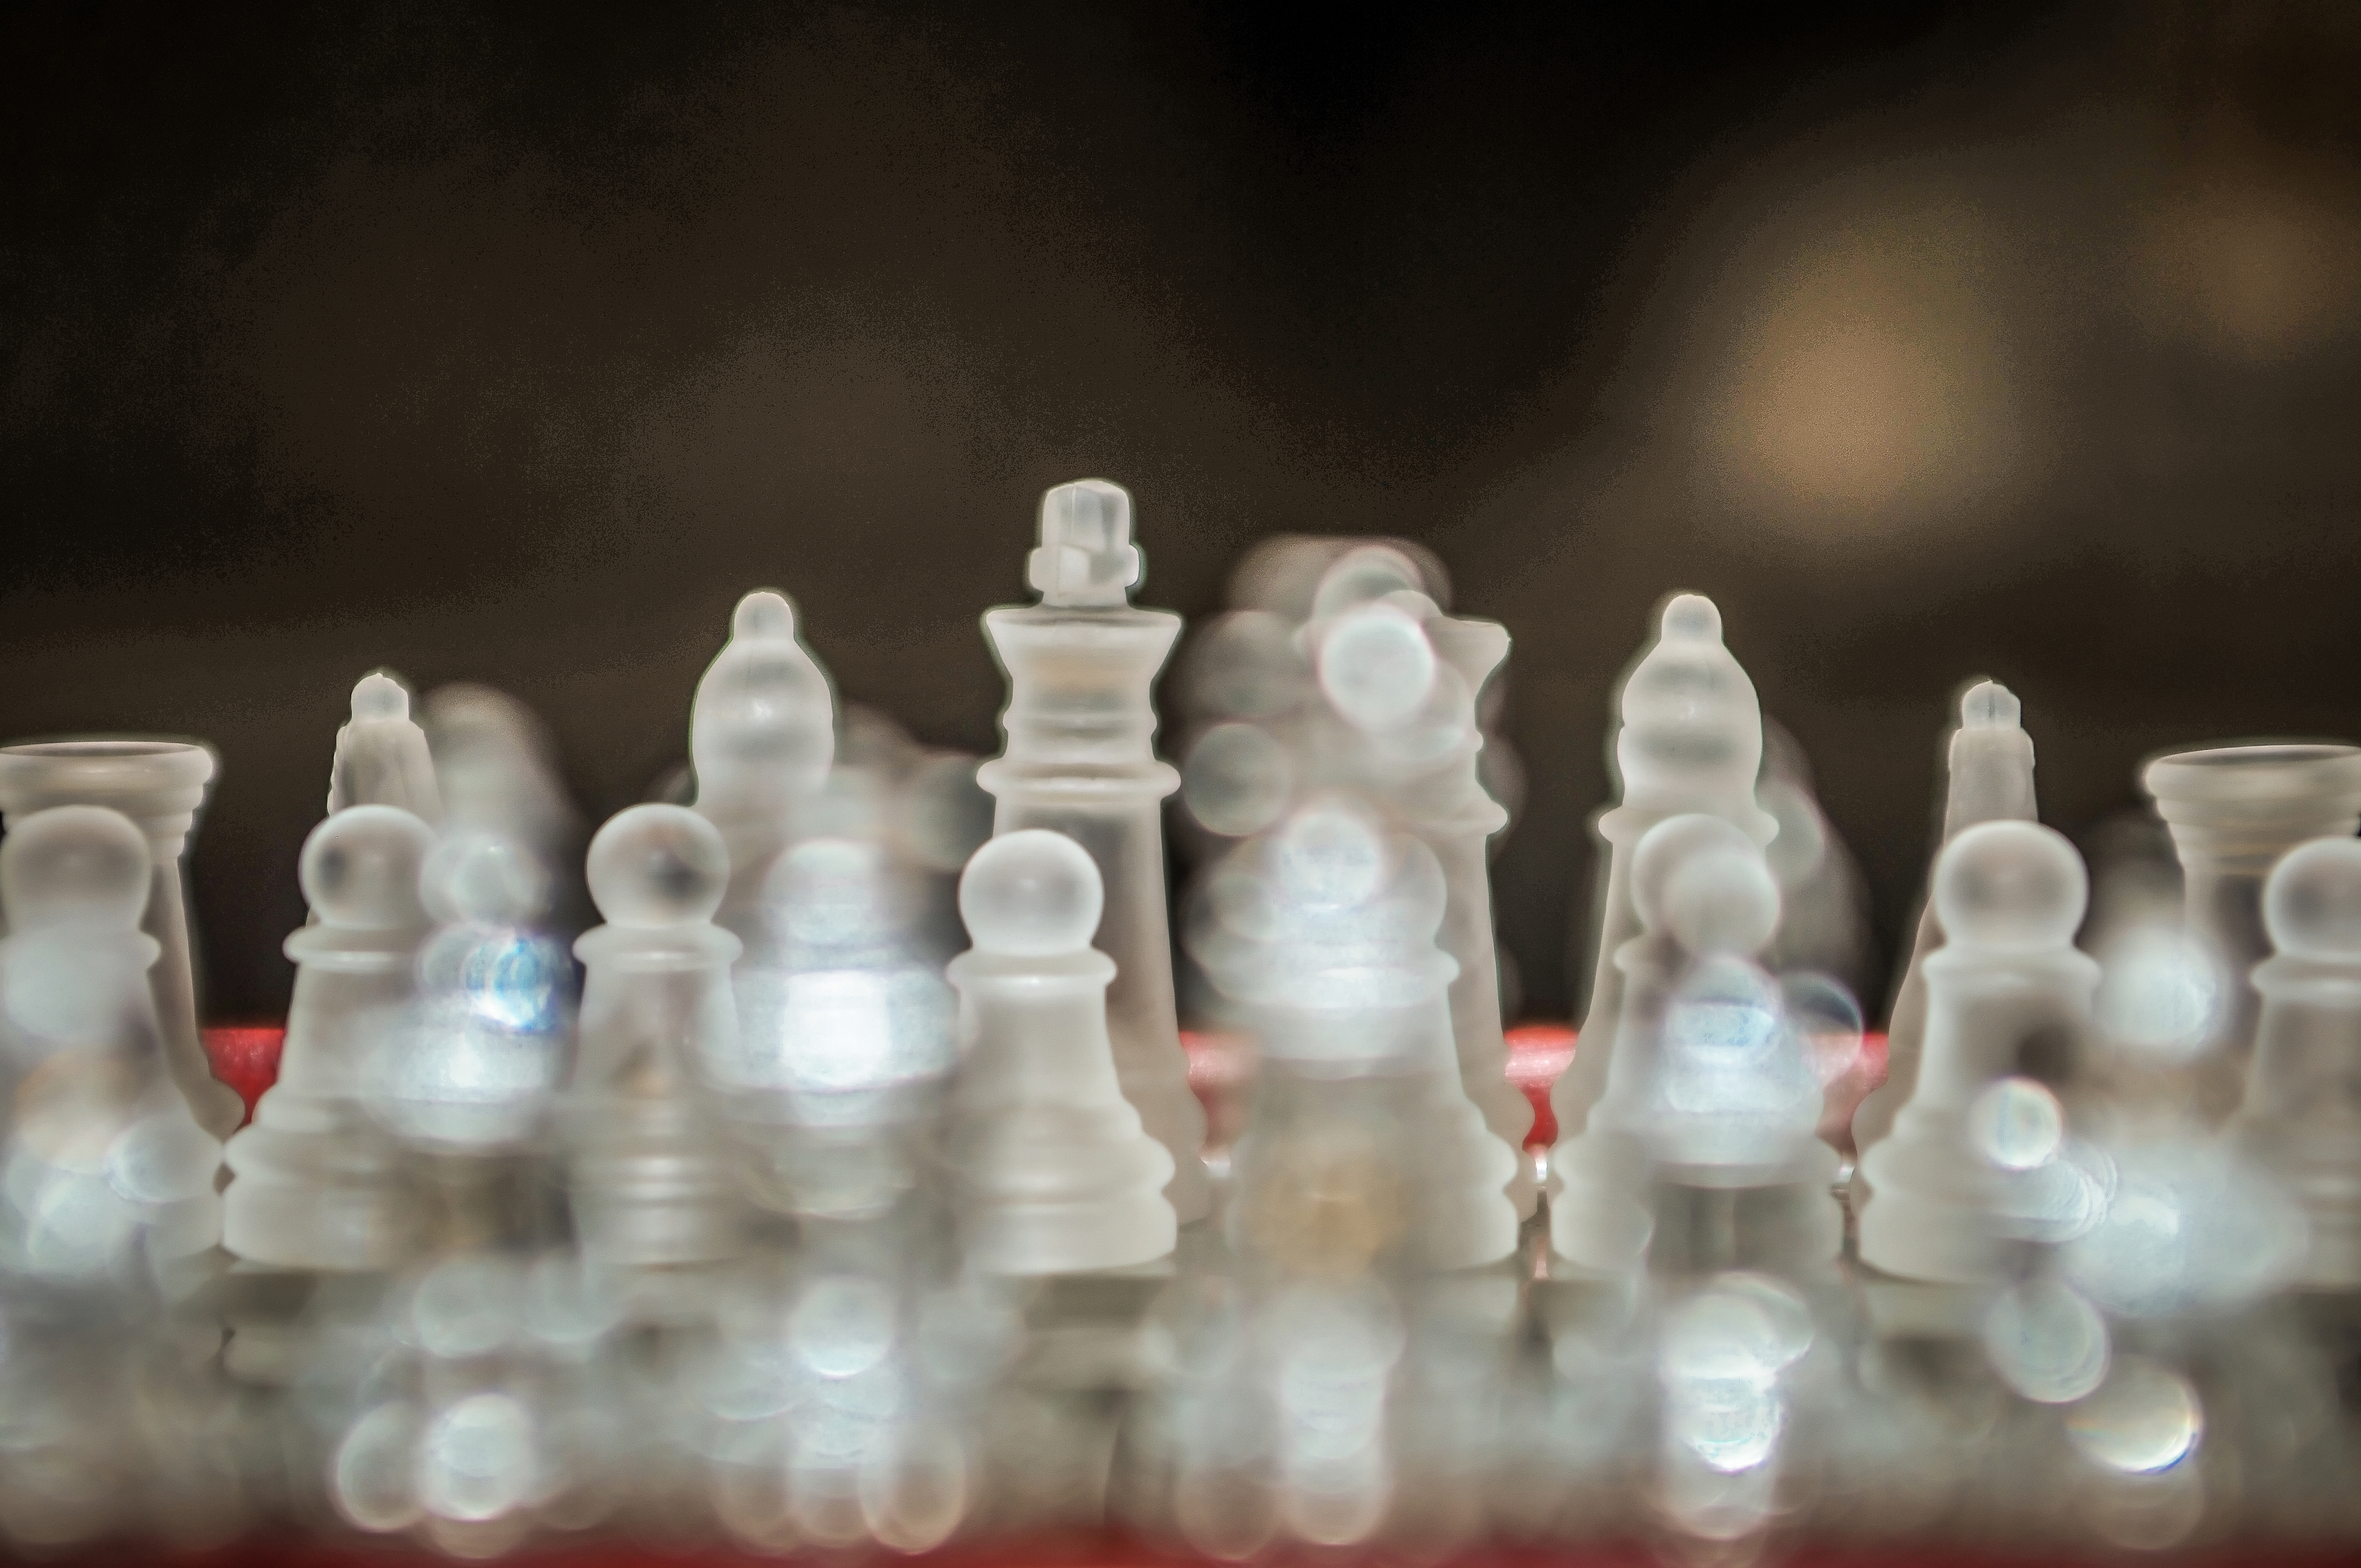 Glass chess, Abstract, Pawn, Piece, Plan, HQ Photo